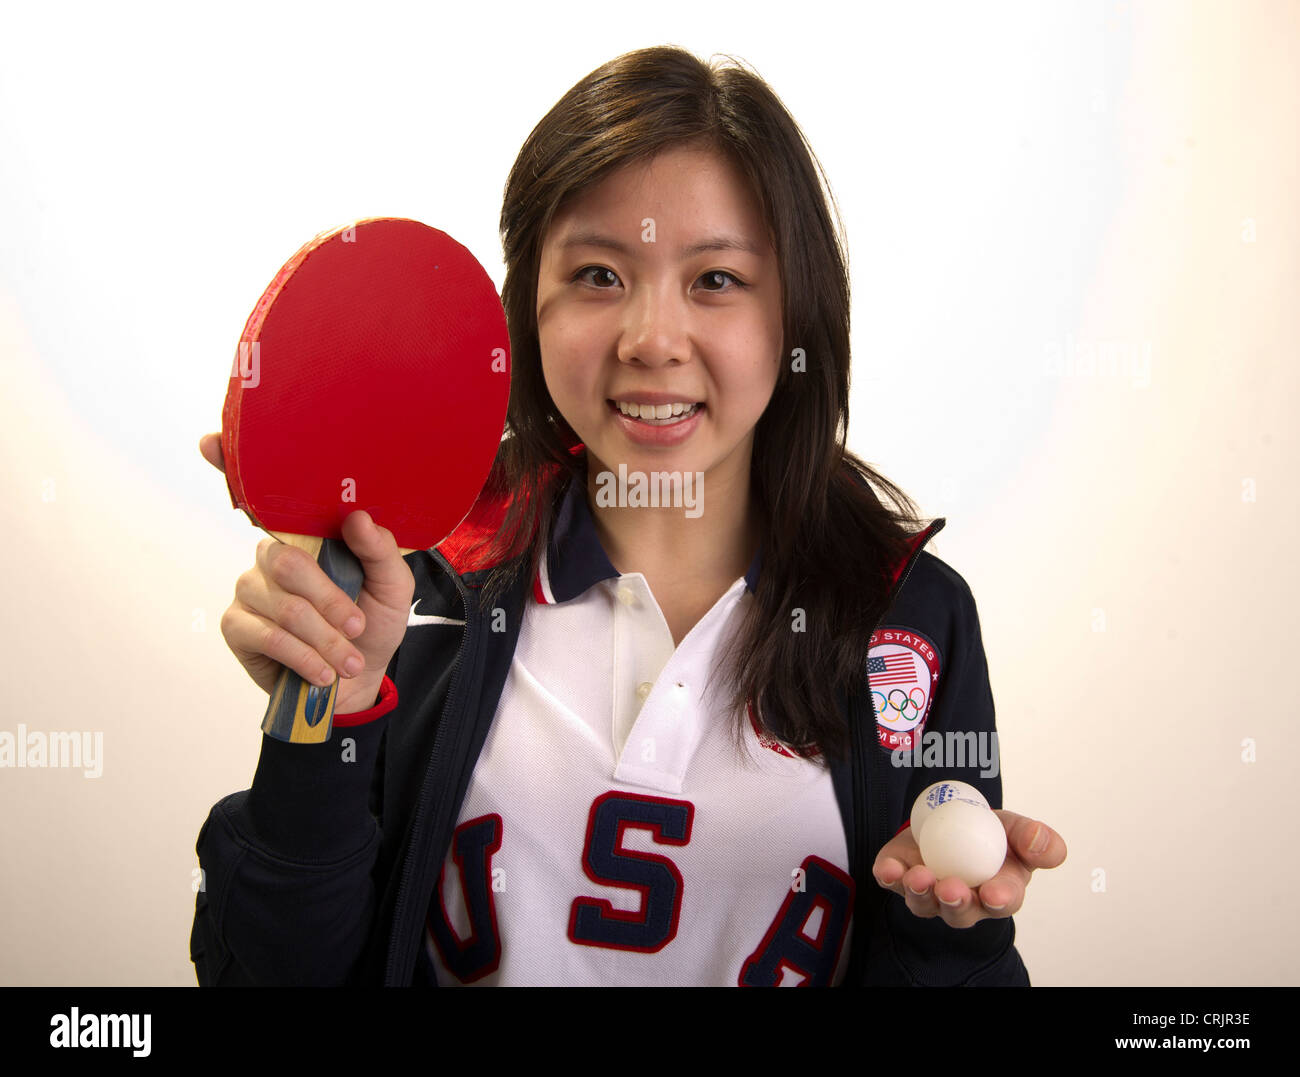 American Table Tennis Player Arielle Hsing At The Team Usa Media Summit In Dallas